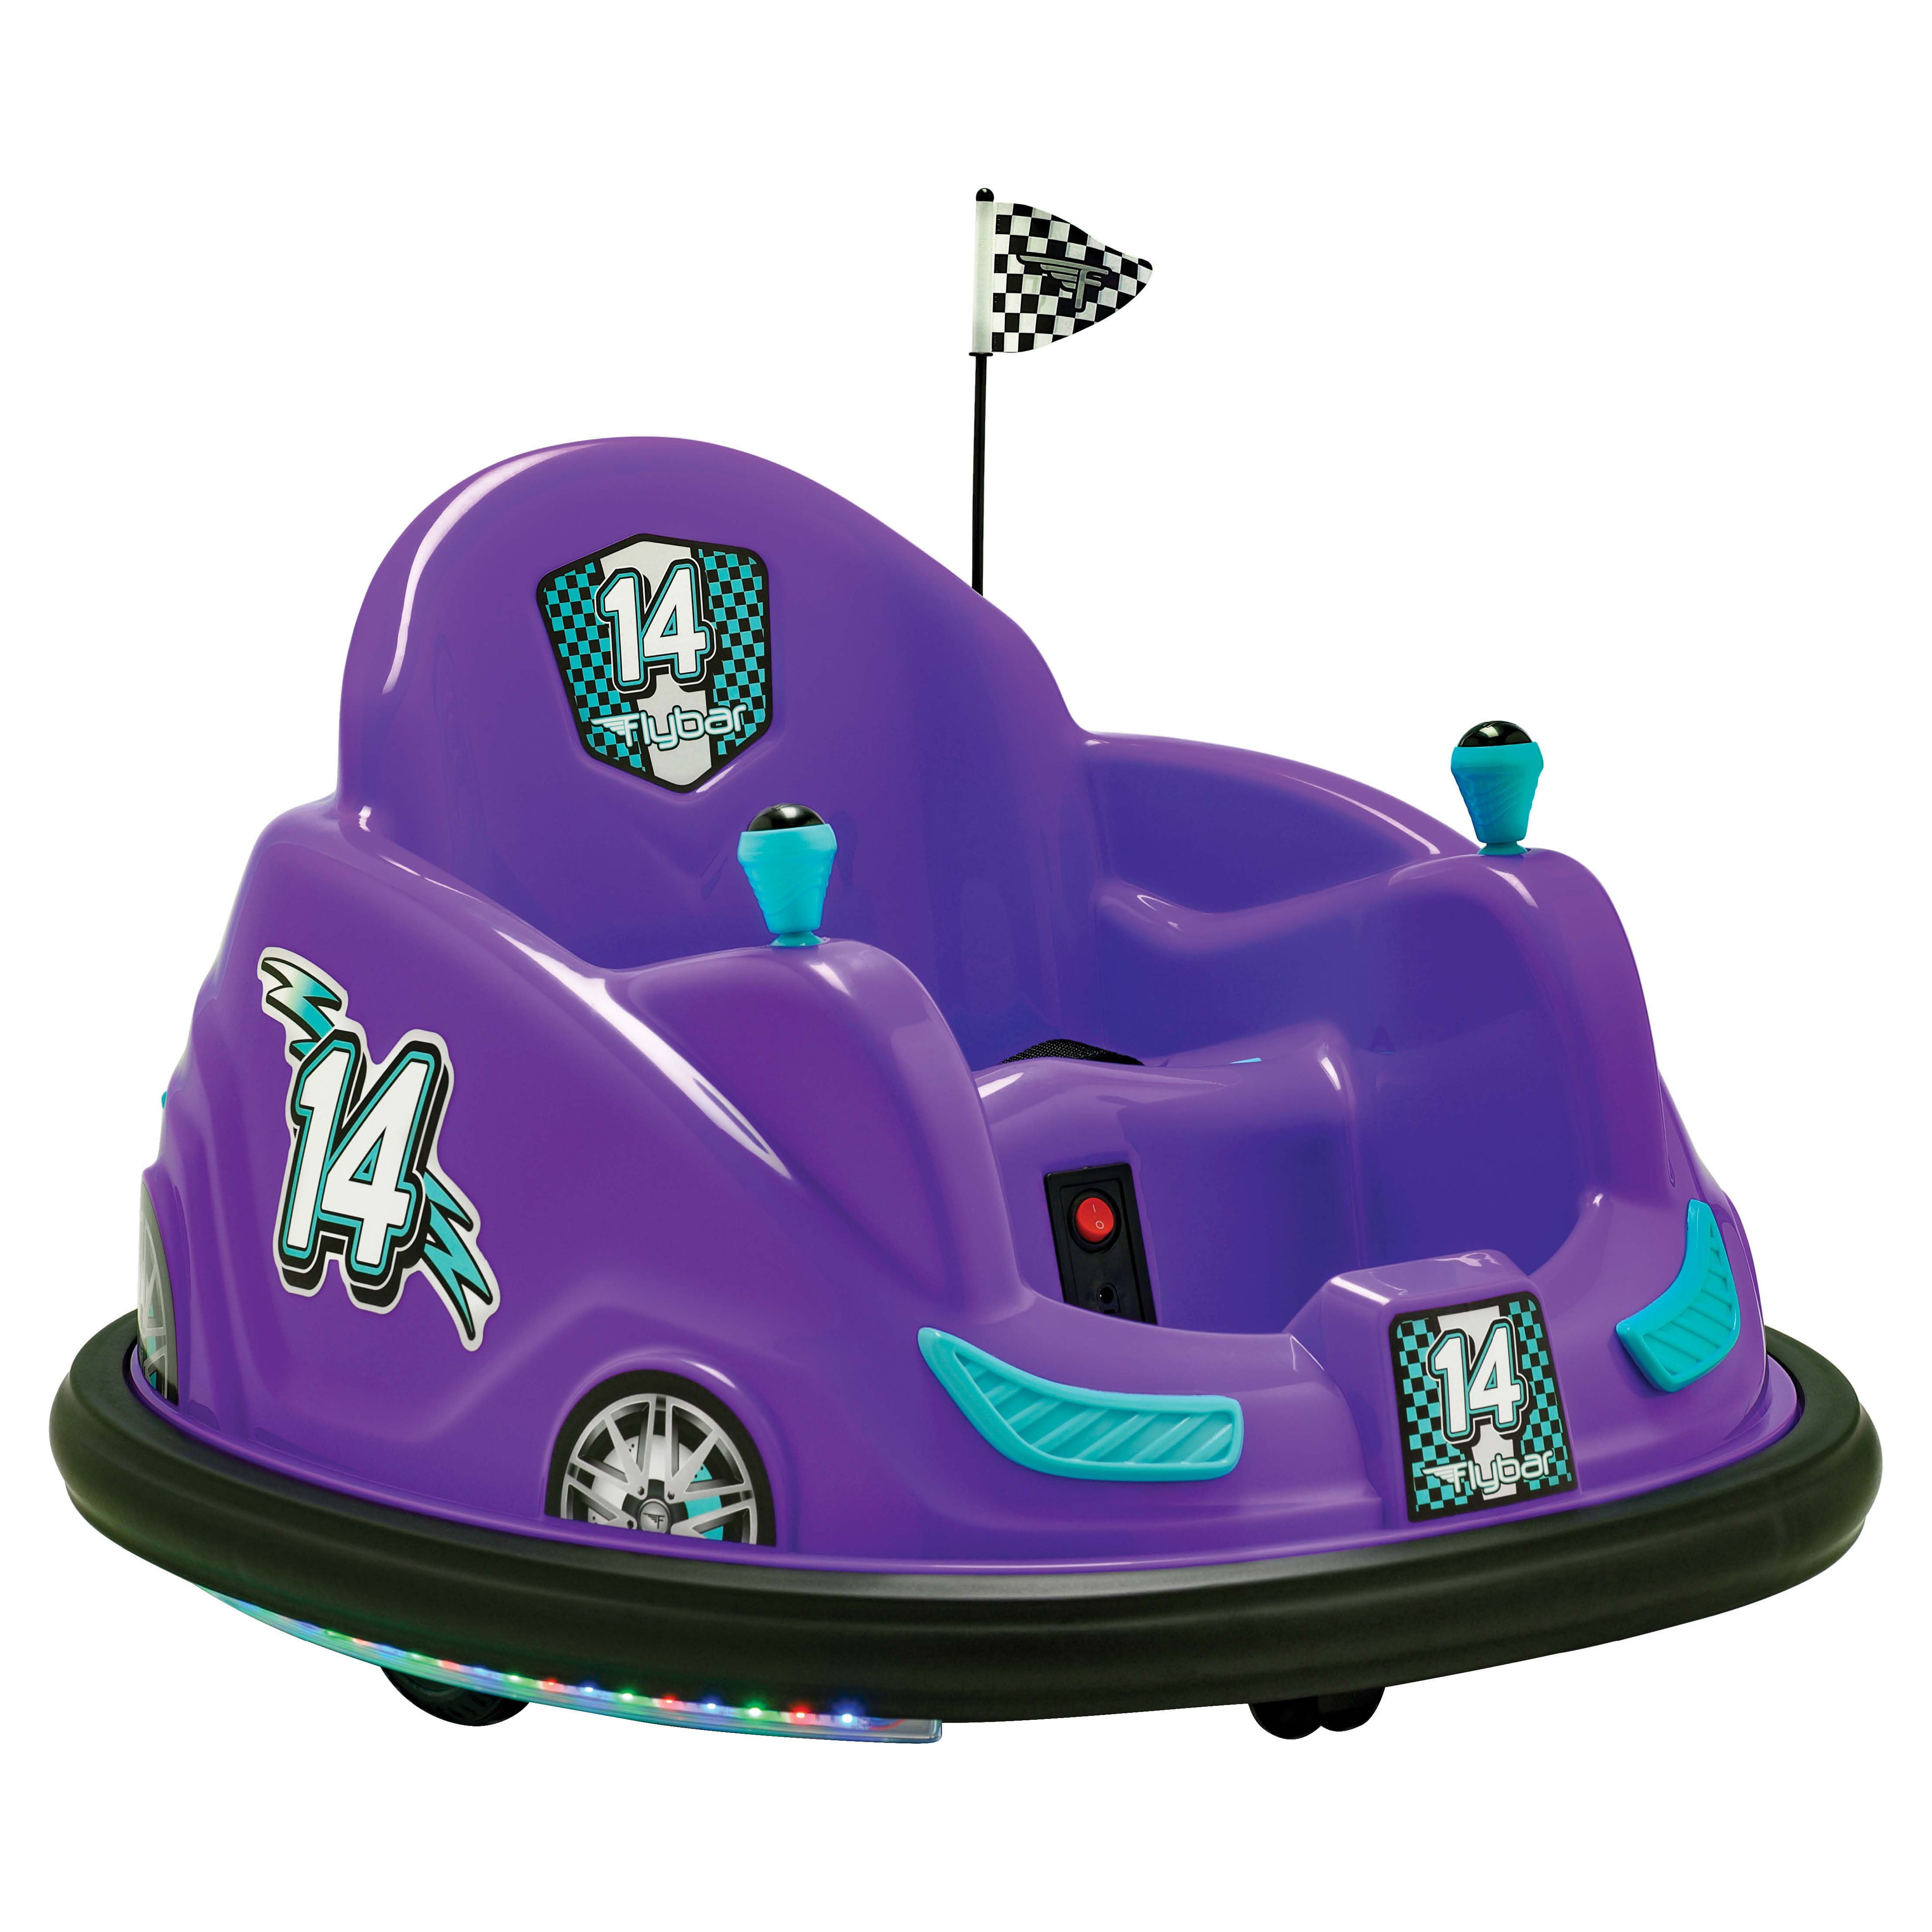 Flybar 6V Bumper Car, Battery Powered Ride On, Fun LED Lights, Includes Charger, Purple - image 1 of 9